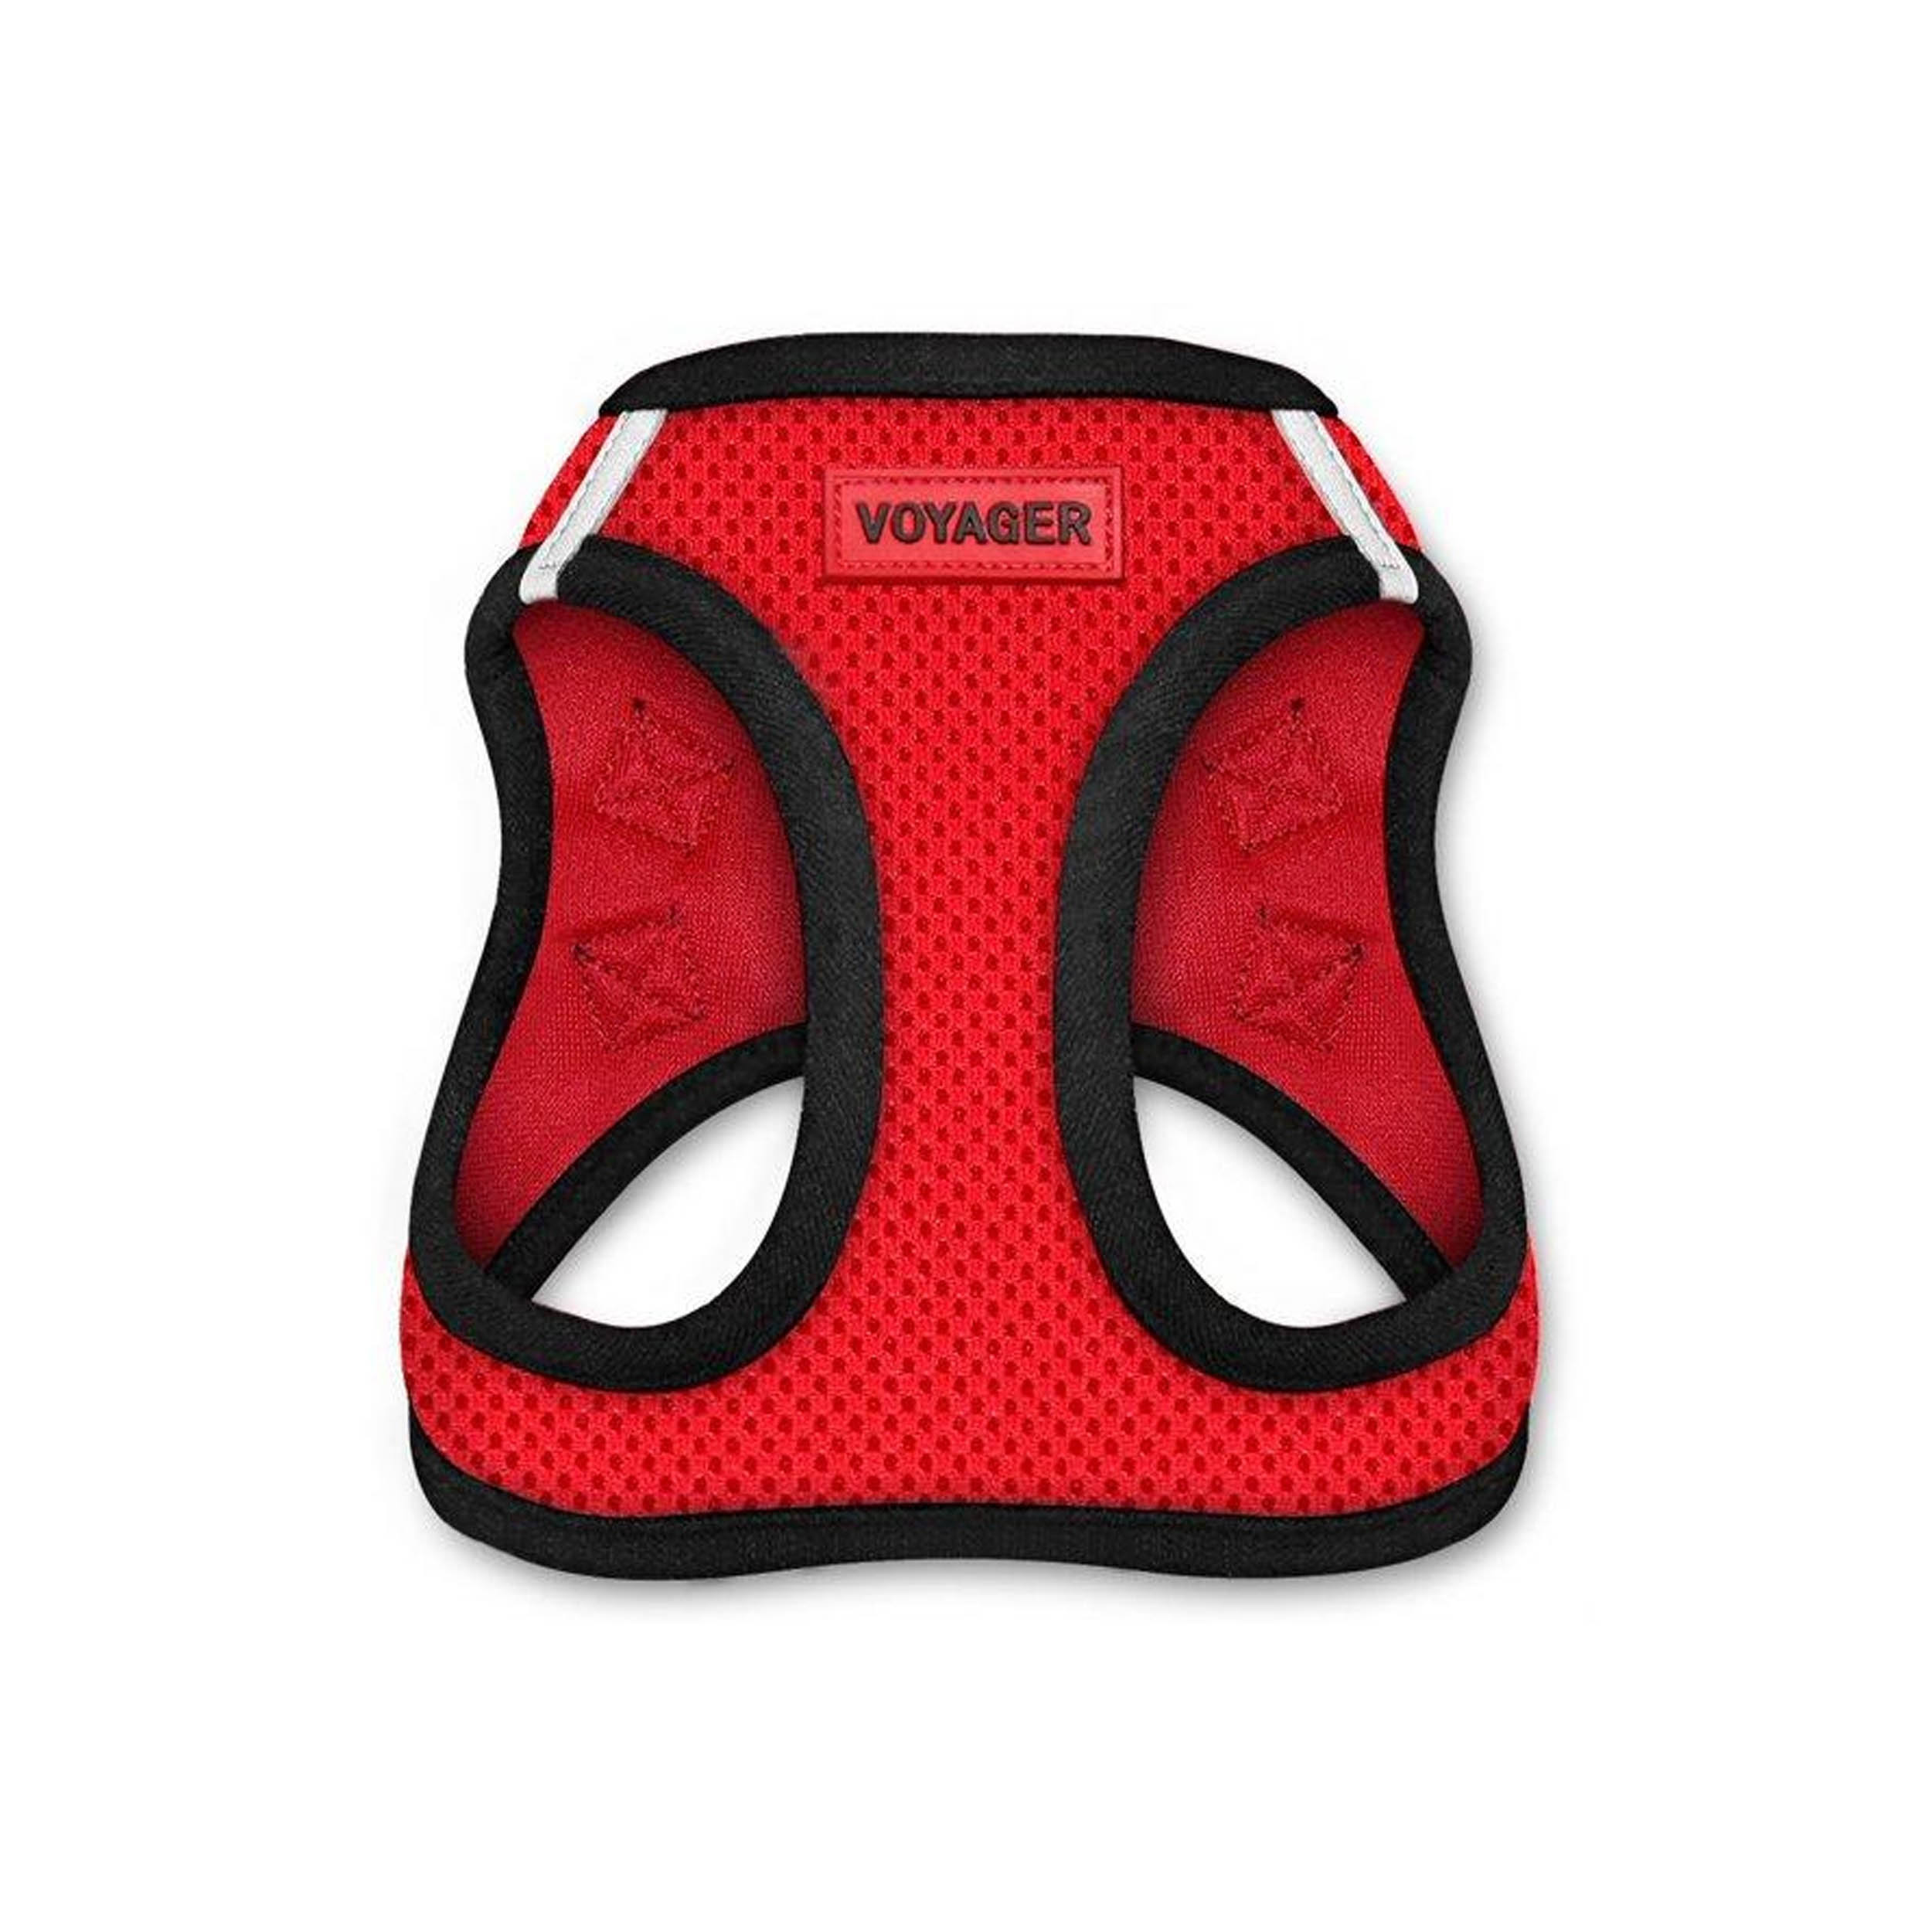 Voyager All Weather No Pull Step-in Mesh Pet Harness - Red